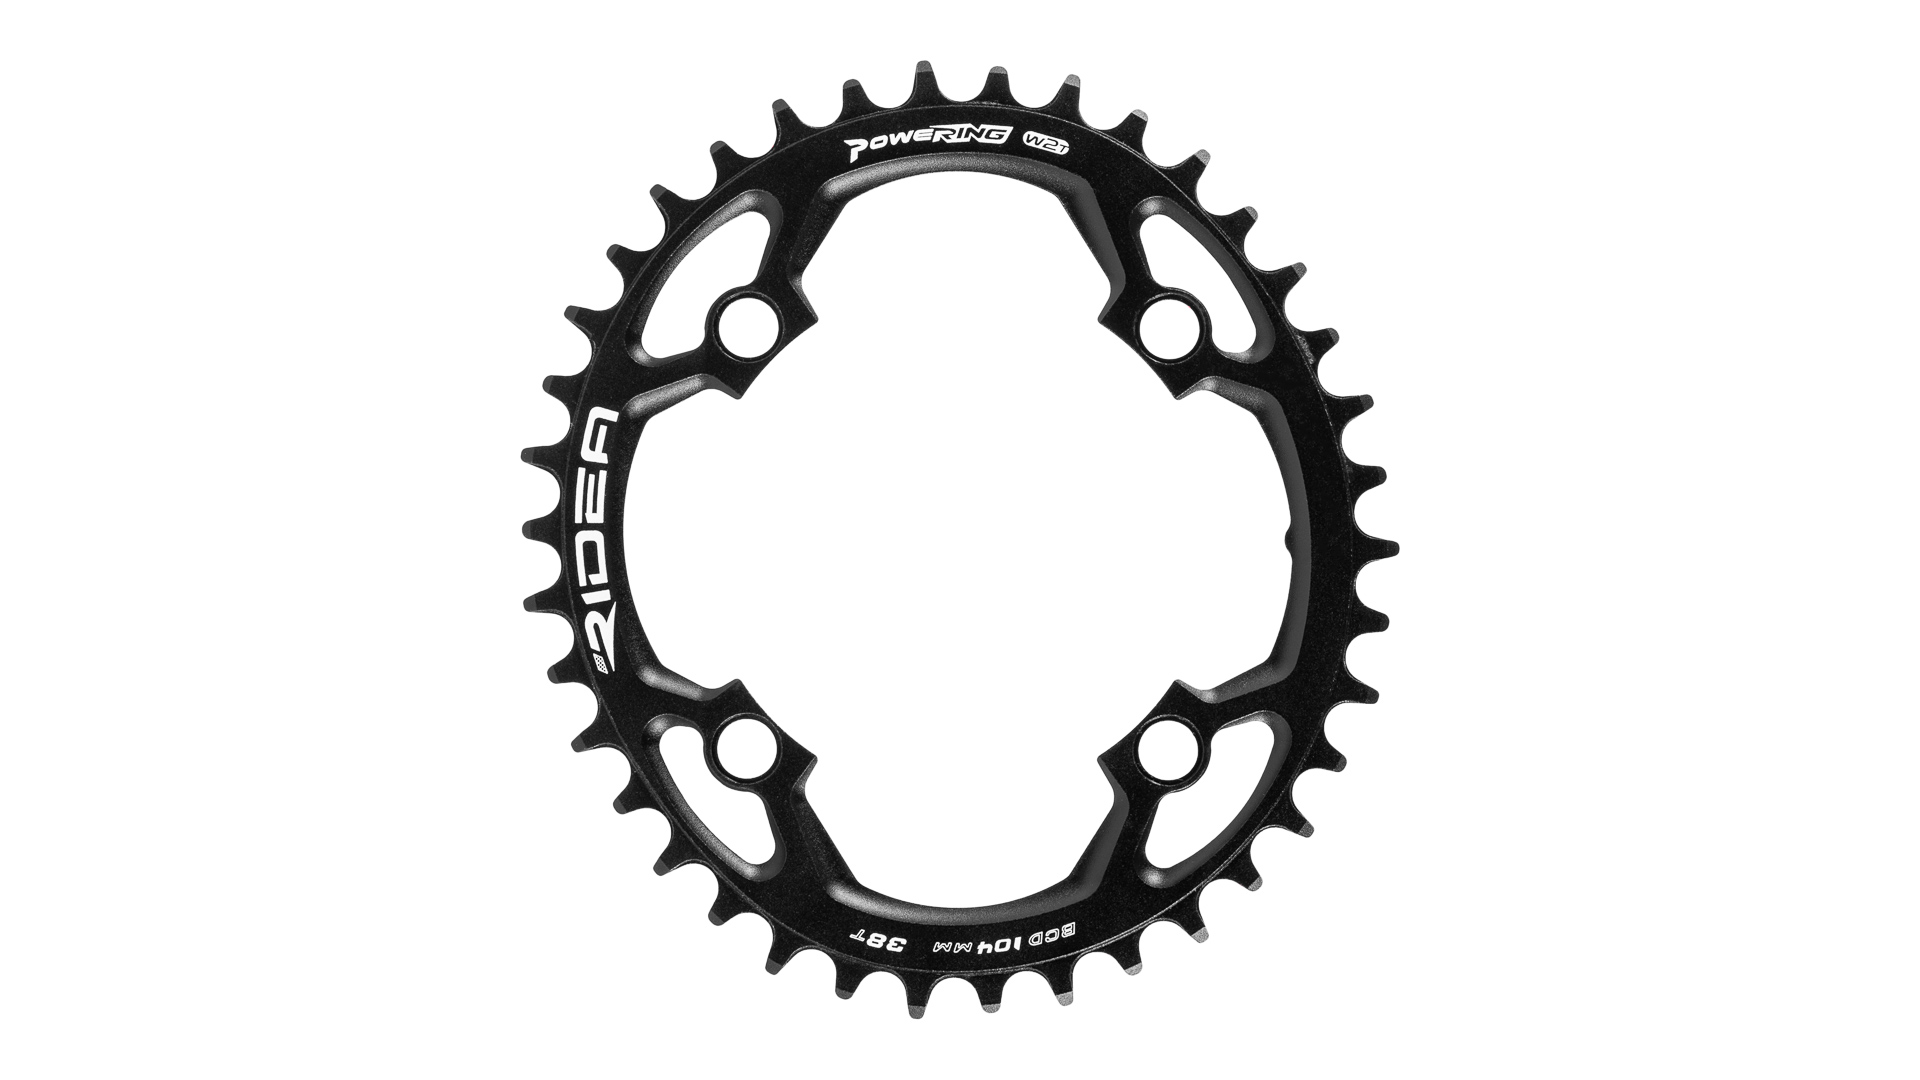 M4S1 chainrings